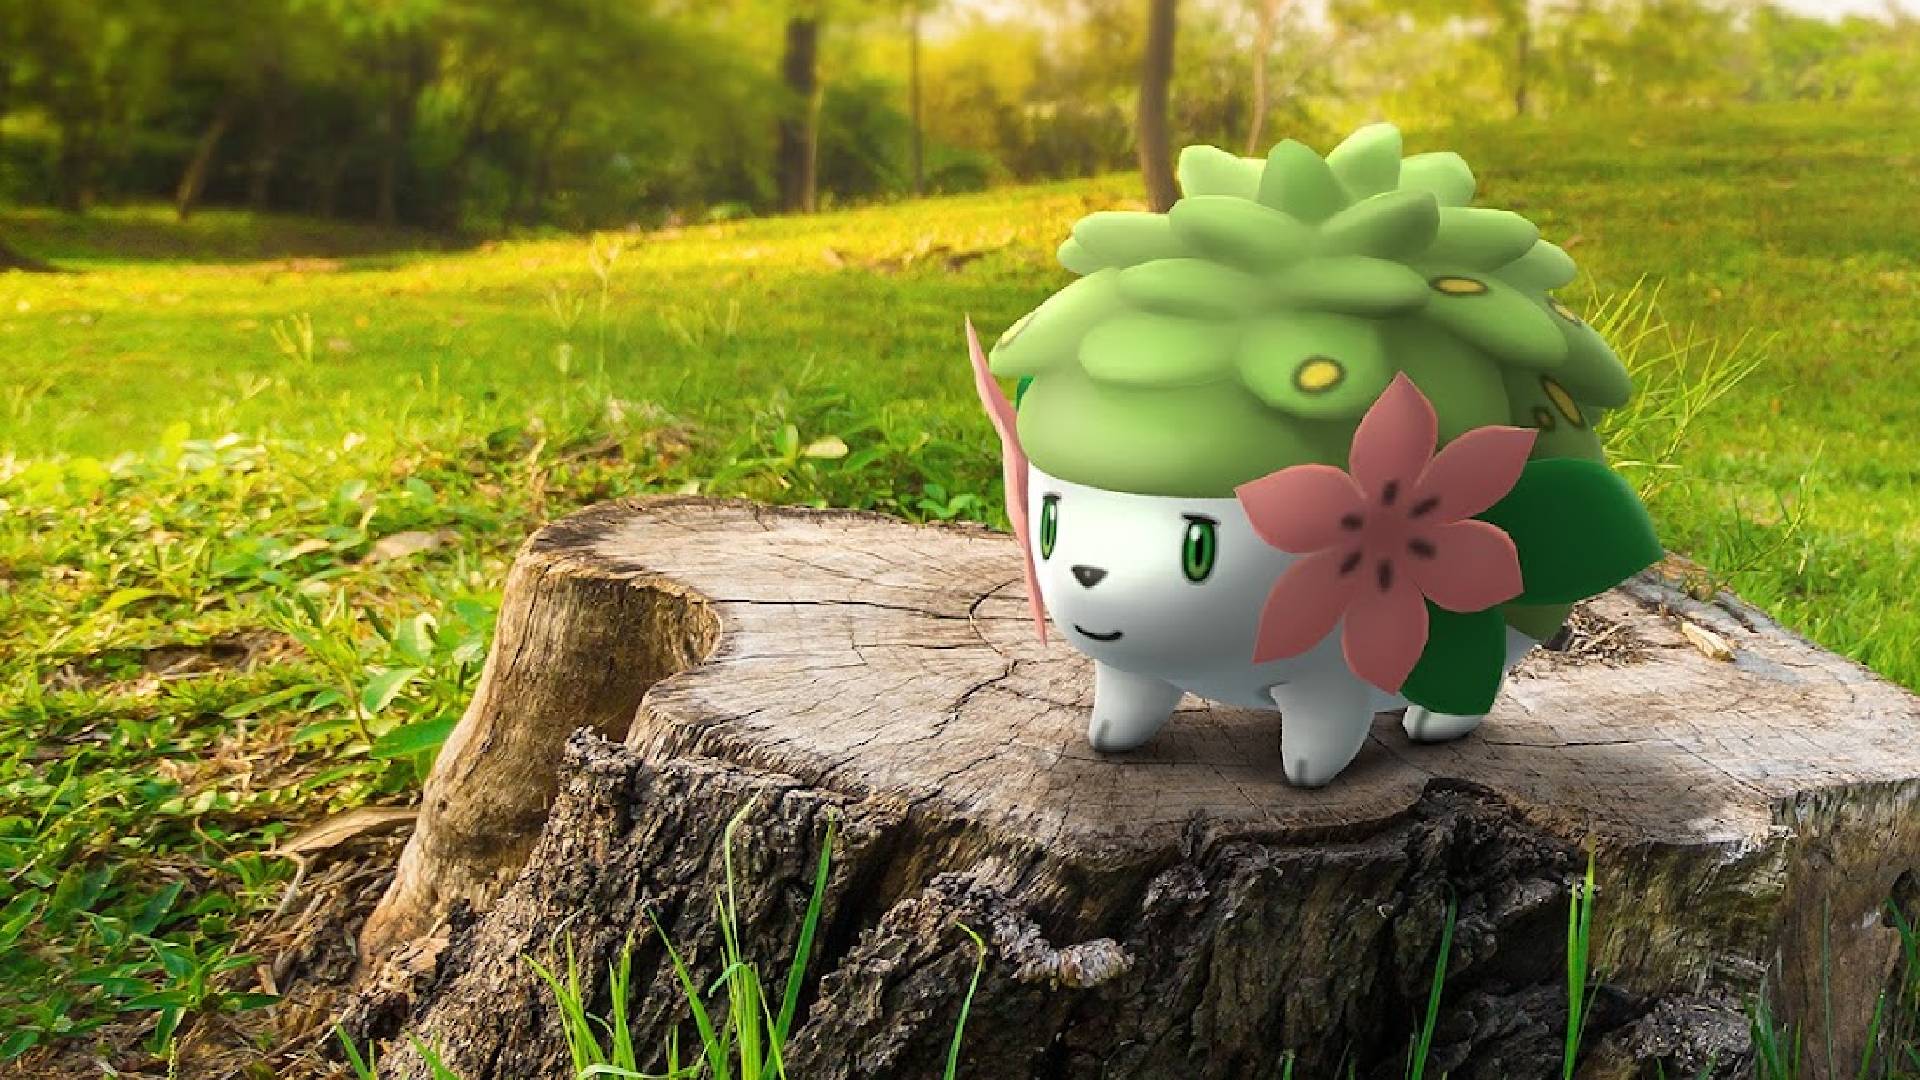 How to get Shaymin Land Forme for free in Pokémon GO: all the